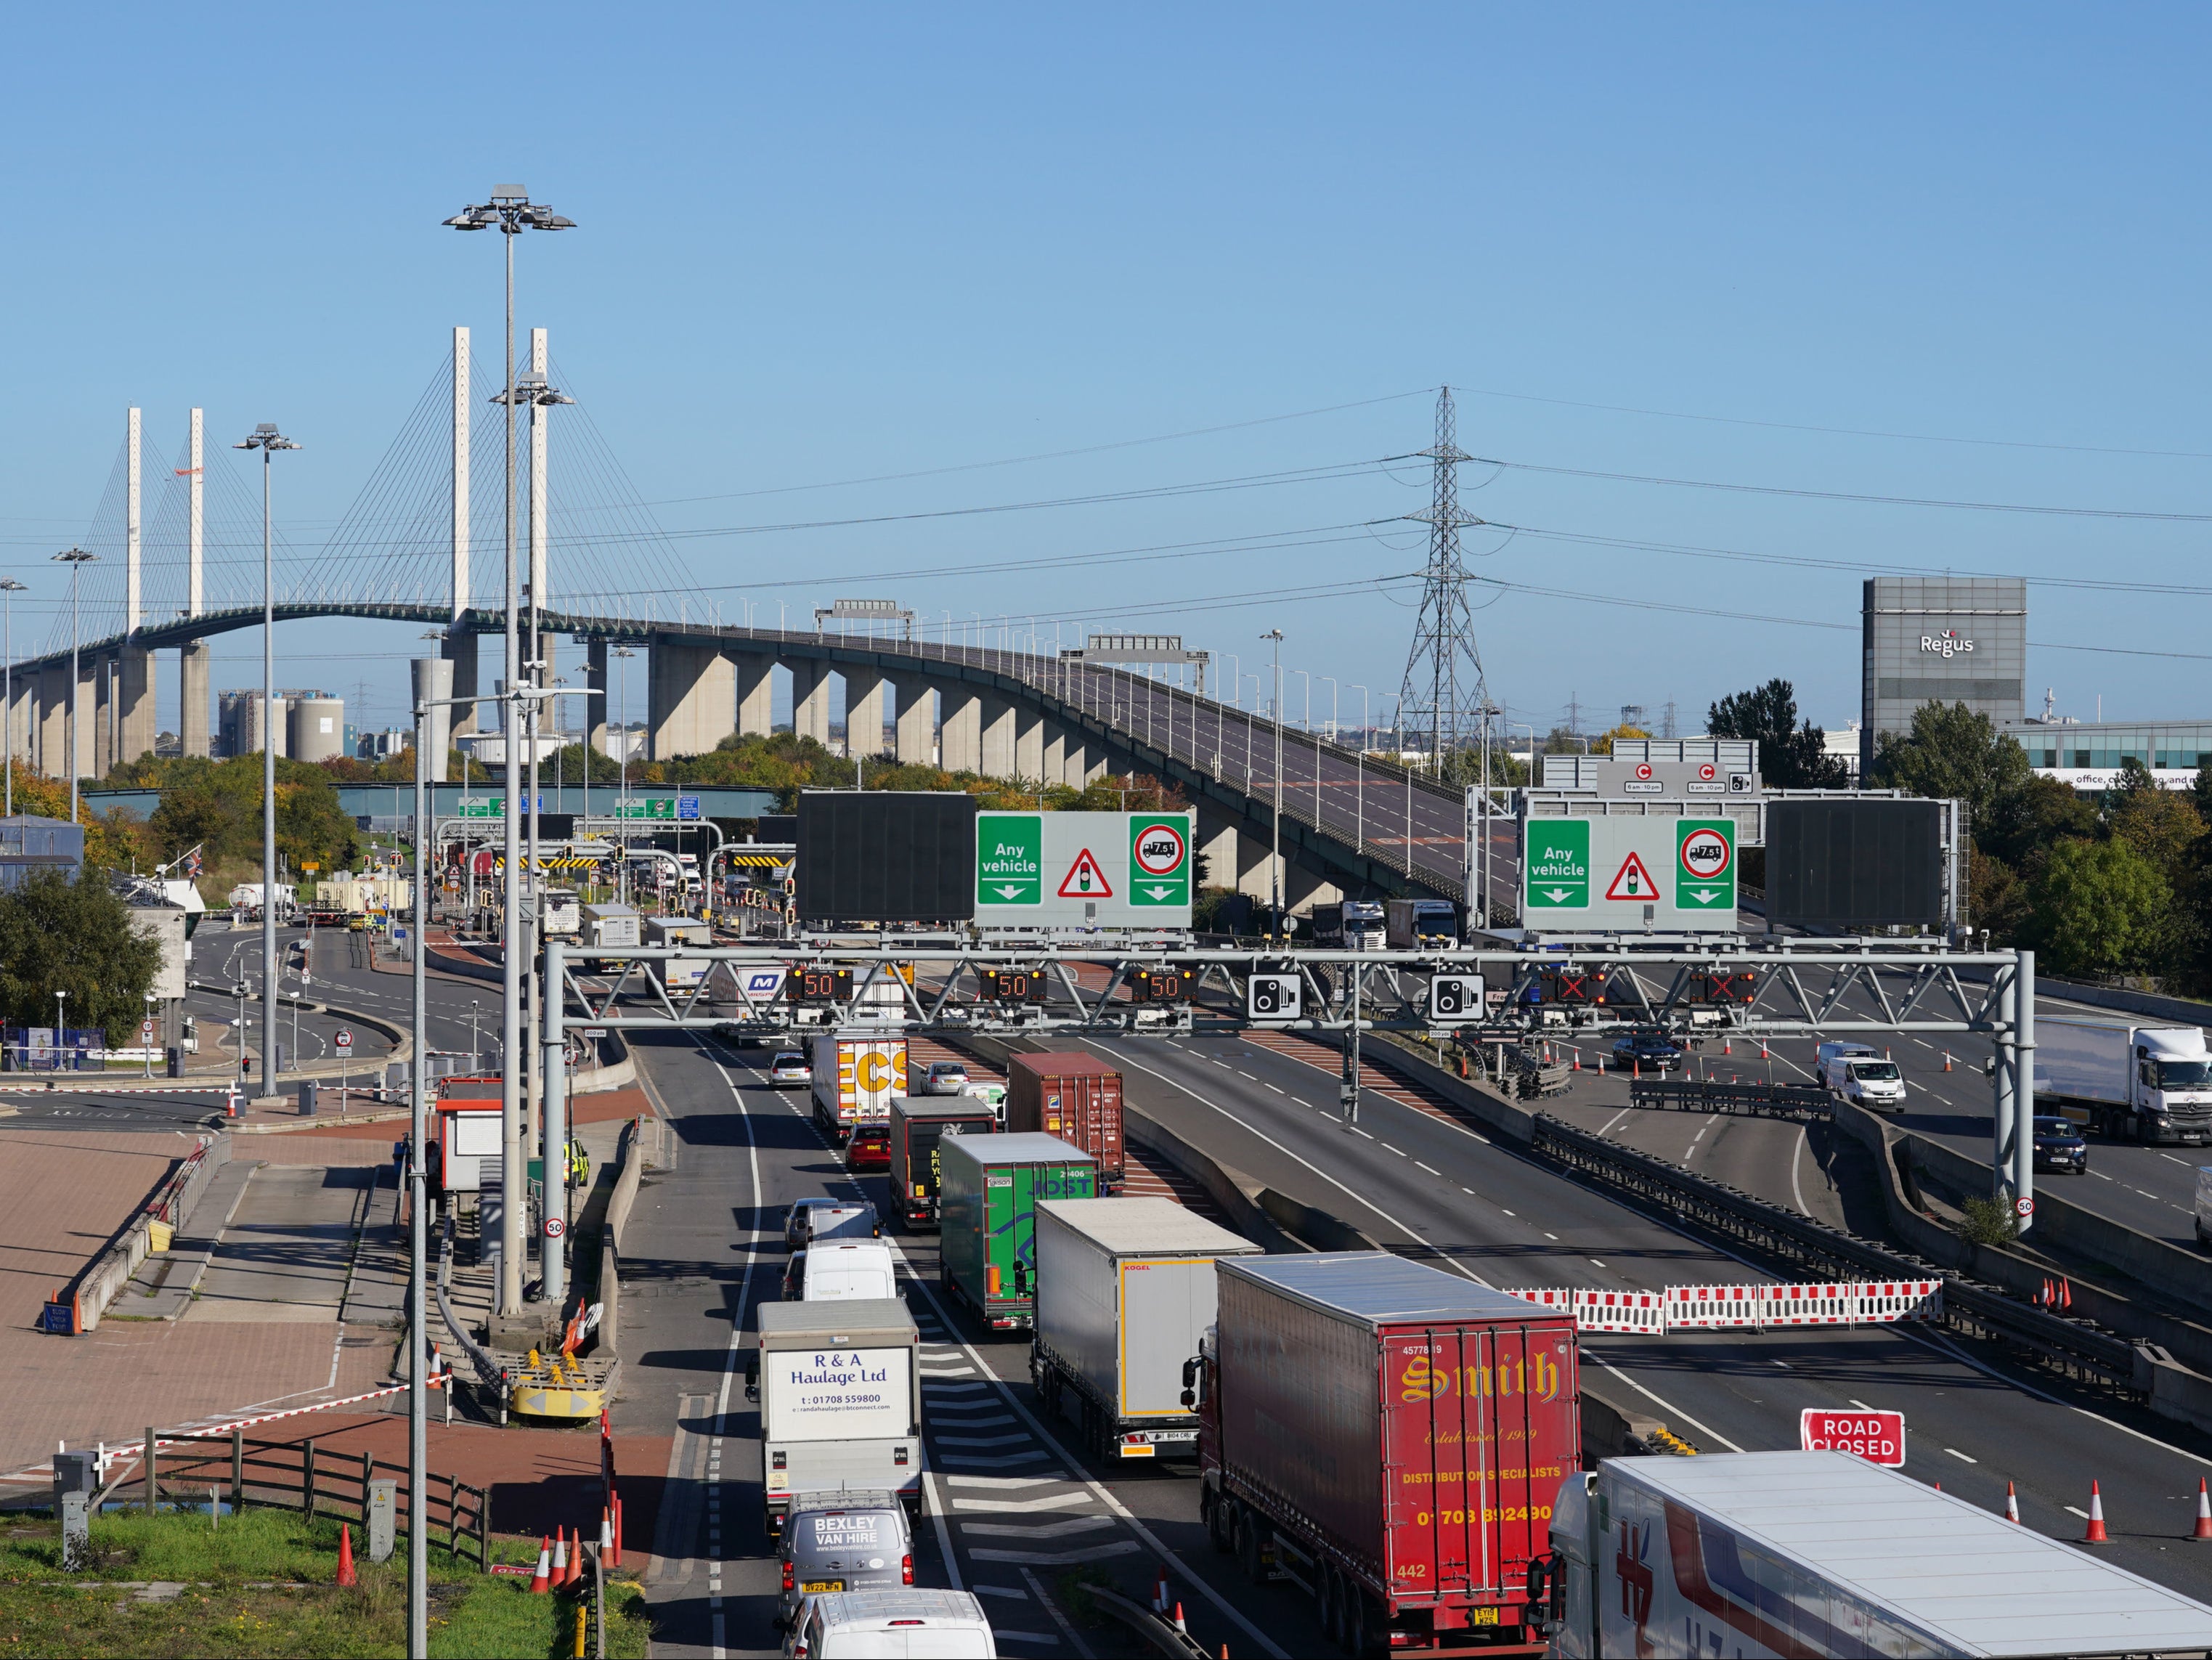 Traffic built up around the Dartford Crossing on Tuesday